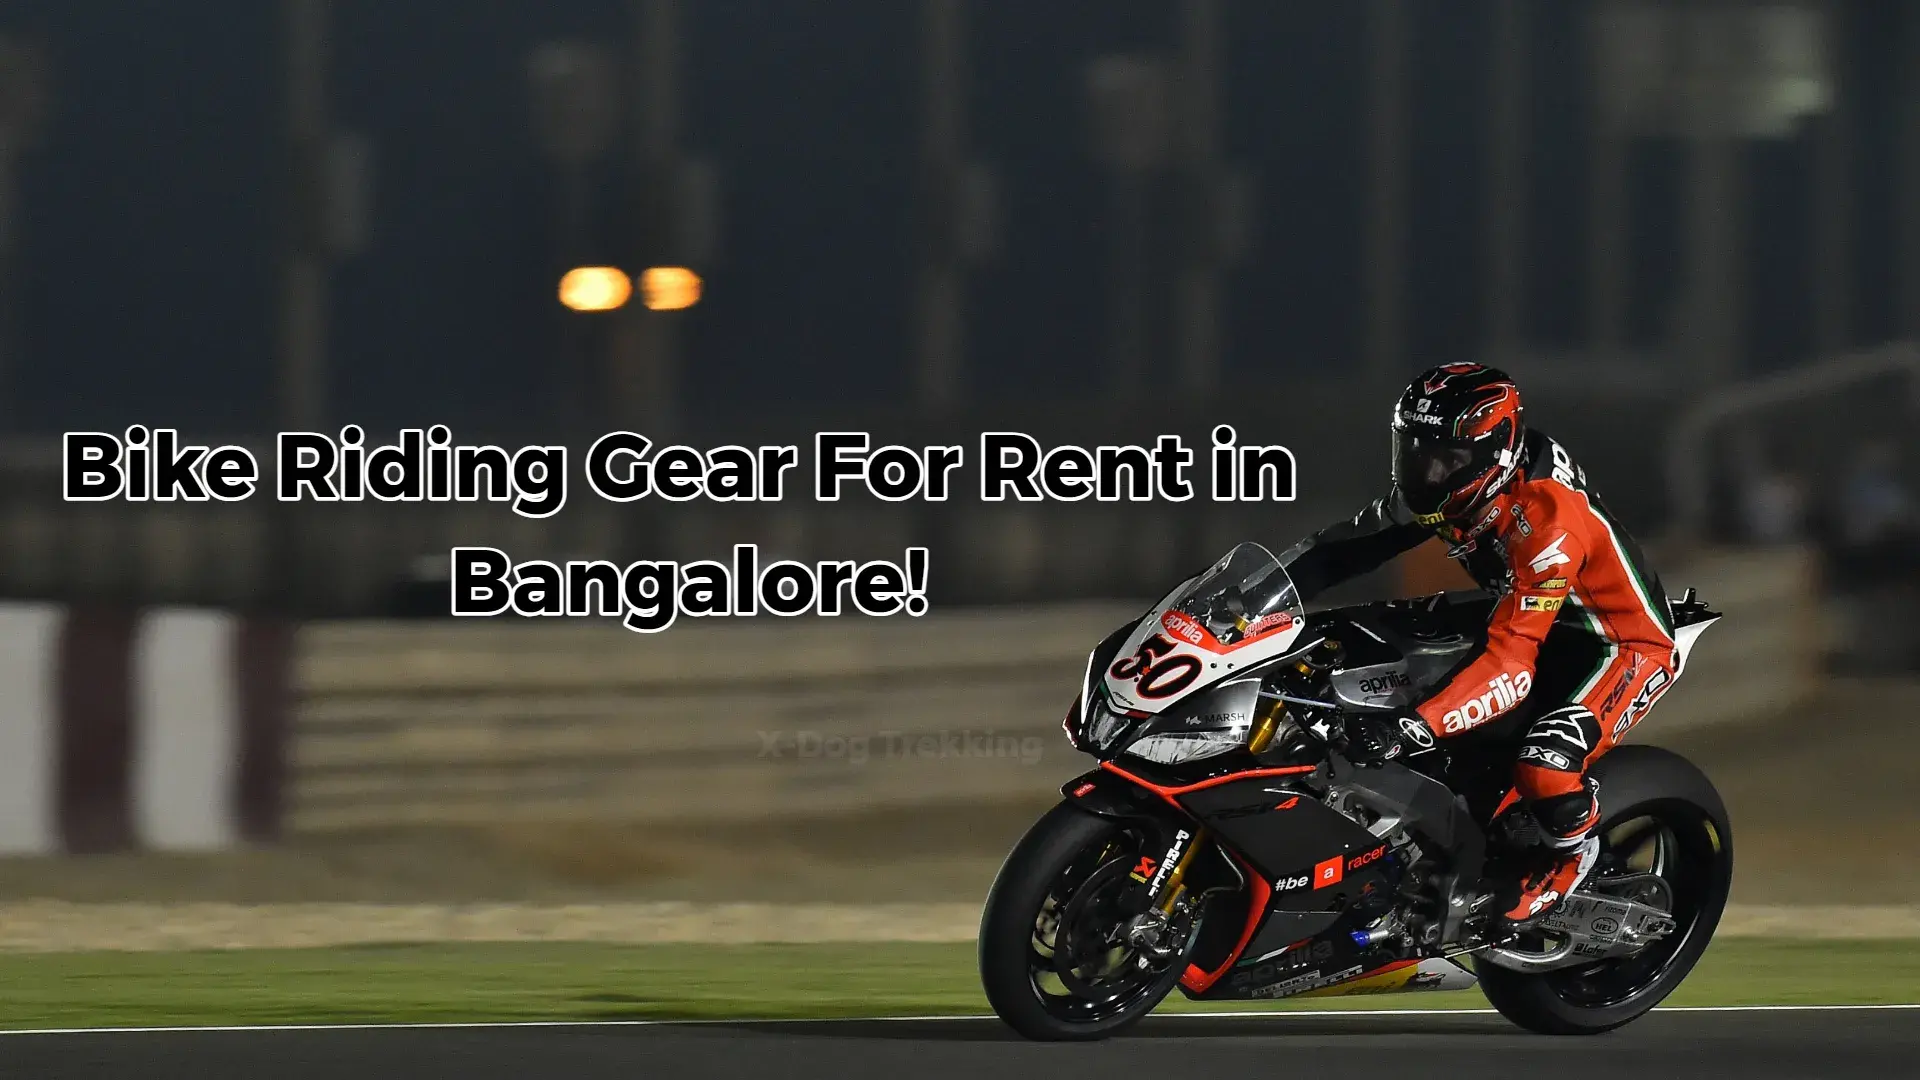 Bike Riding Gear For Rent in Bangalore!